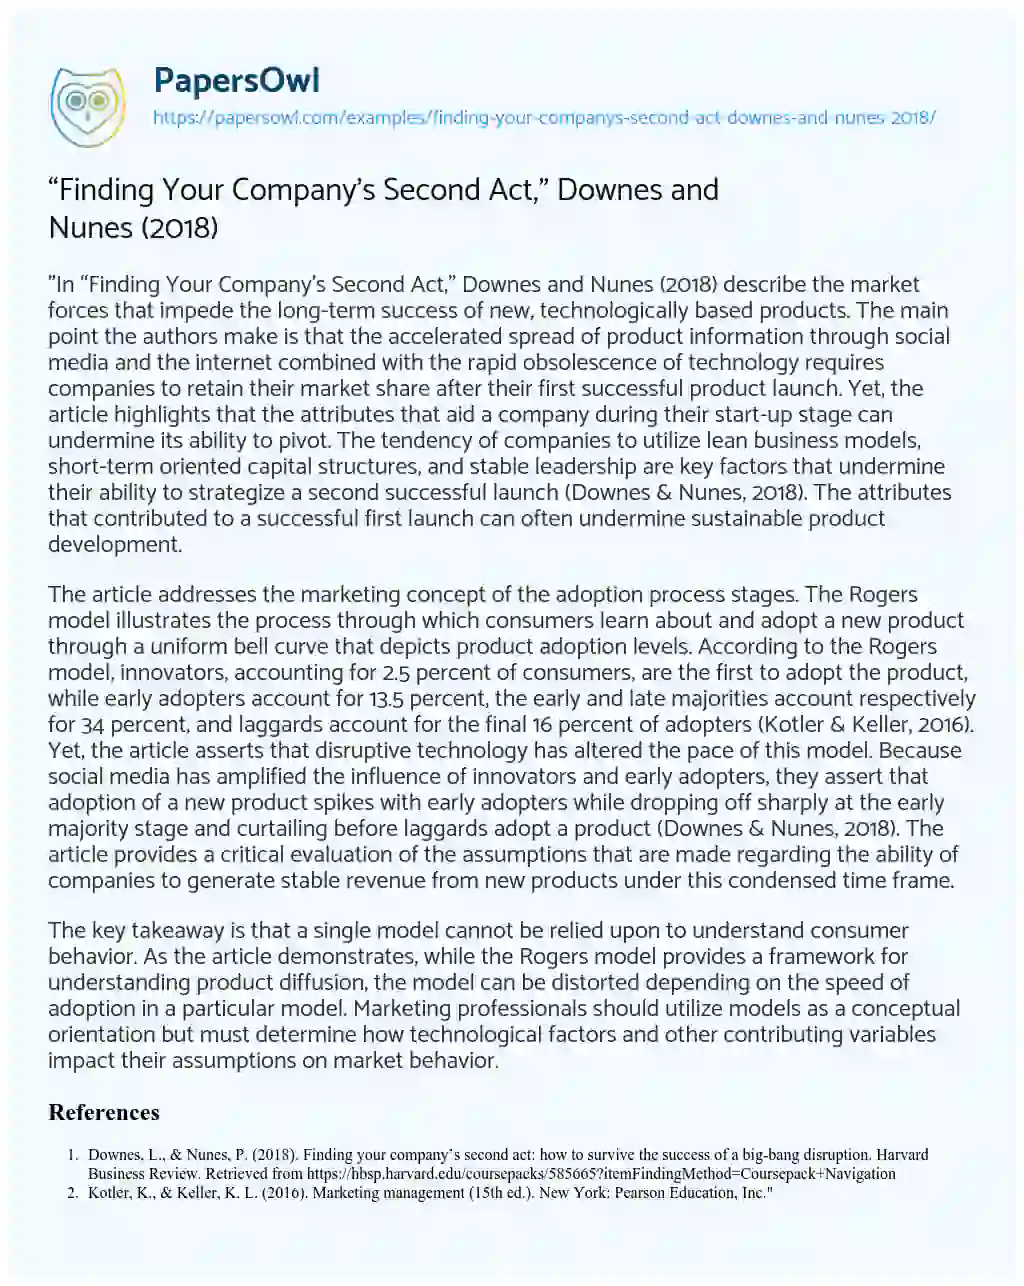 Essay on “Finding your Company’s Second Act,” Downes and Nunes (2018)